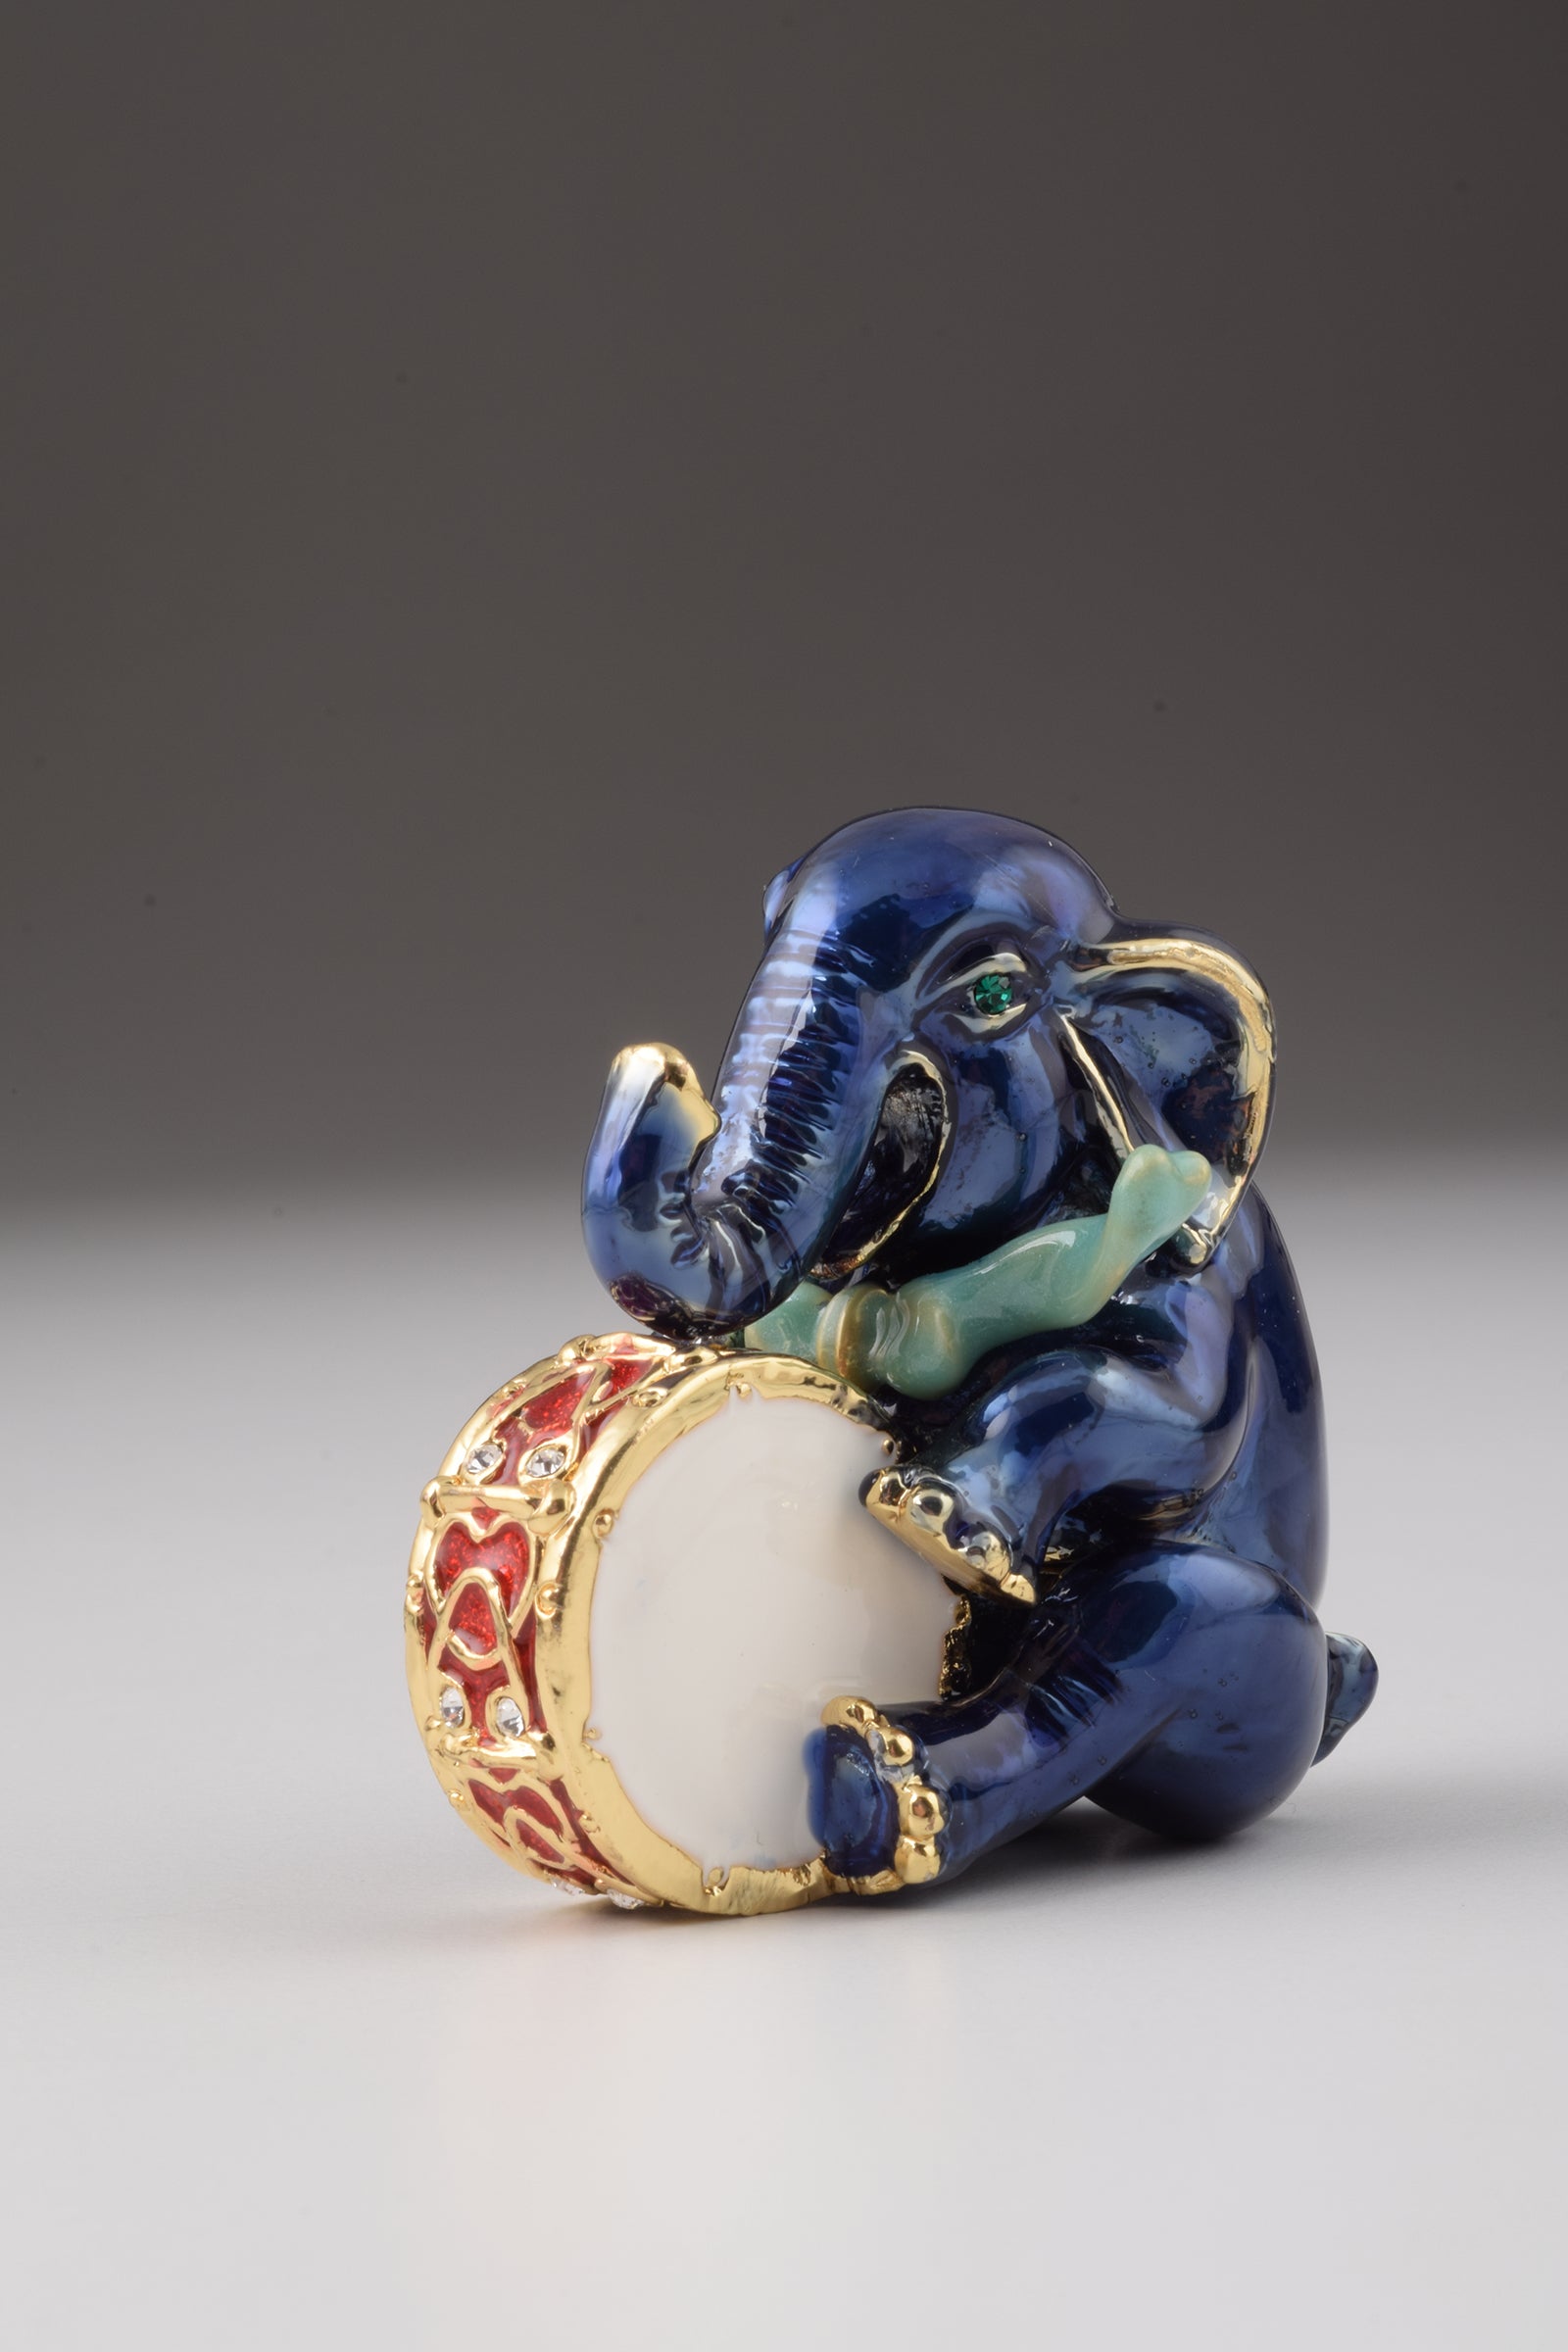 Blue Elephant with Drum